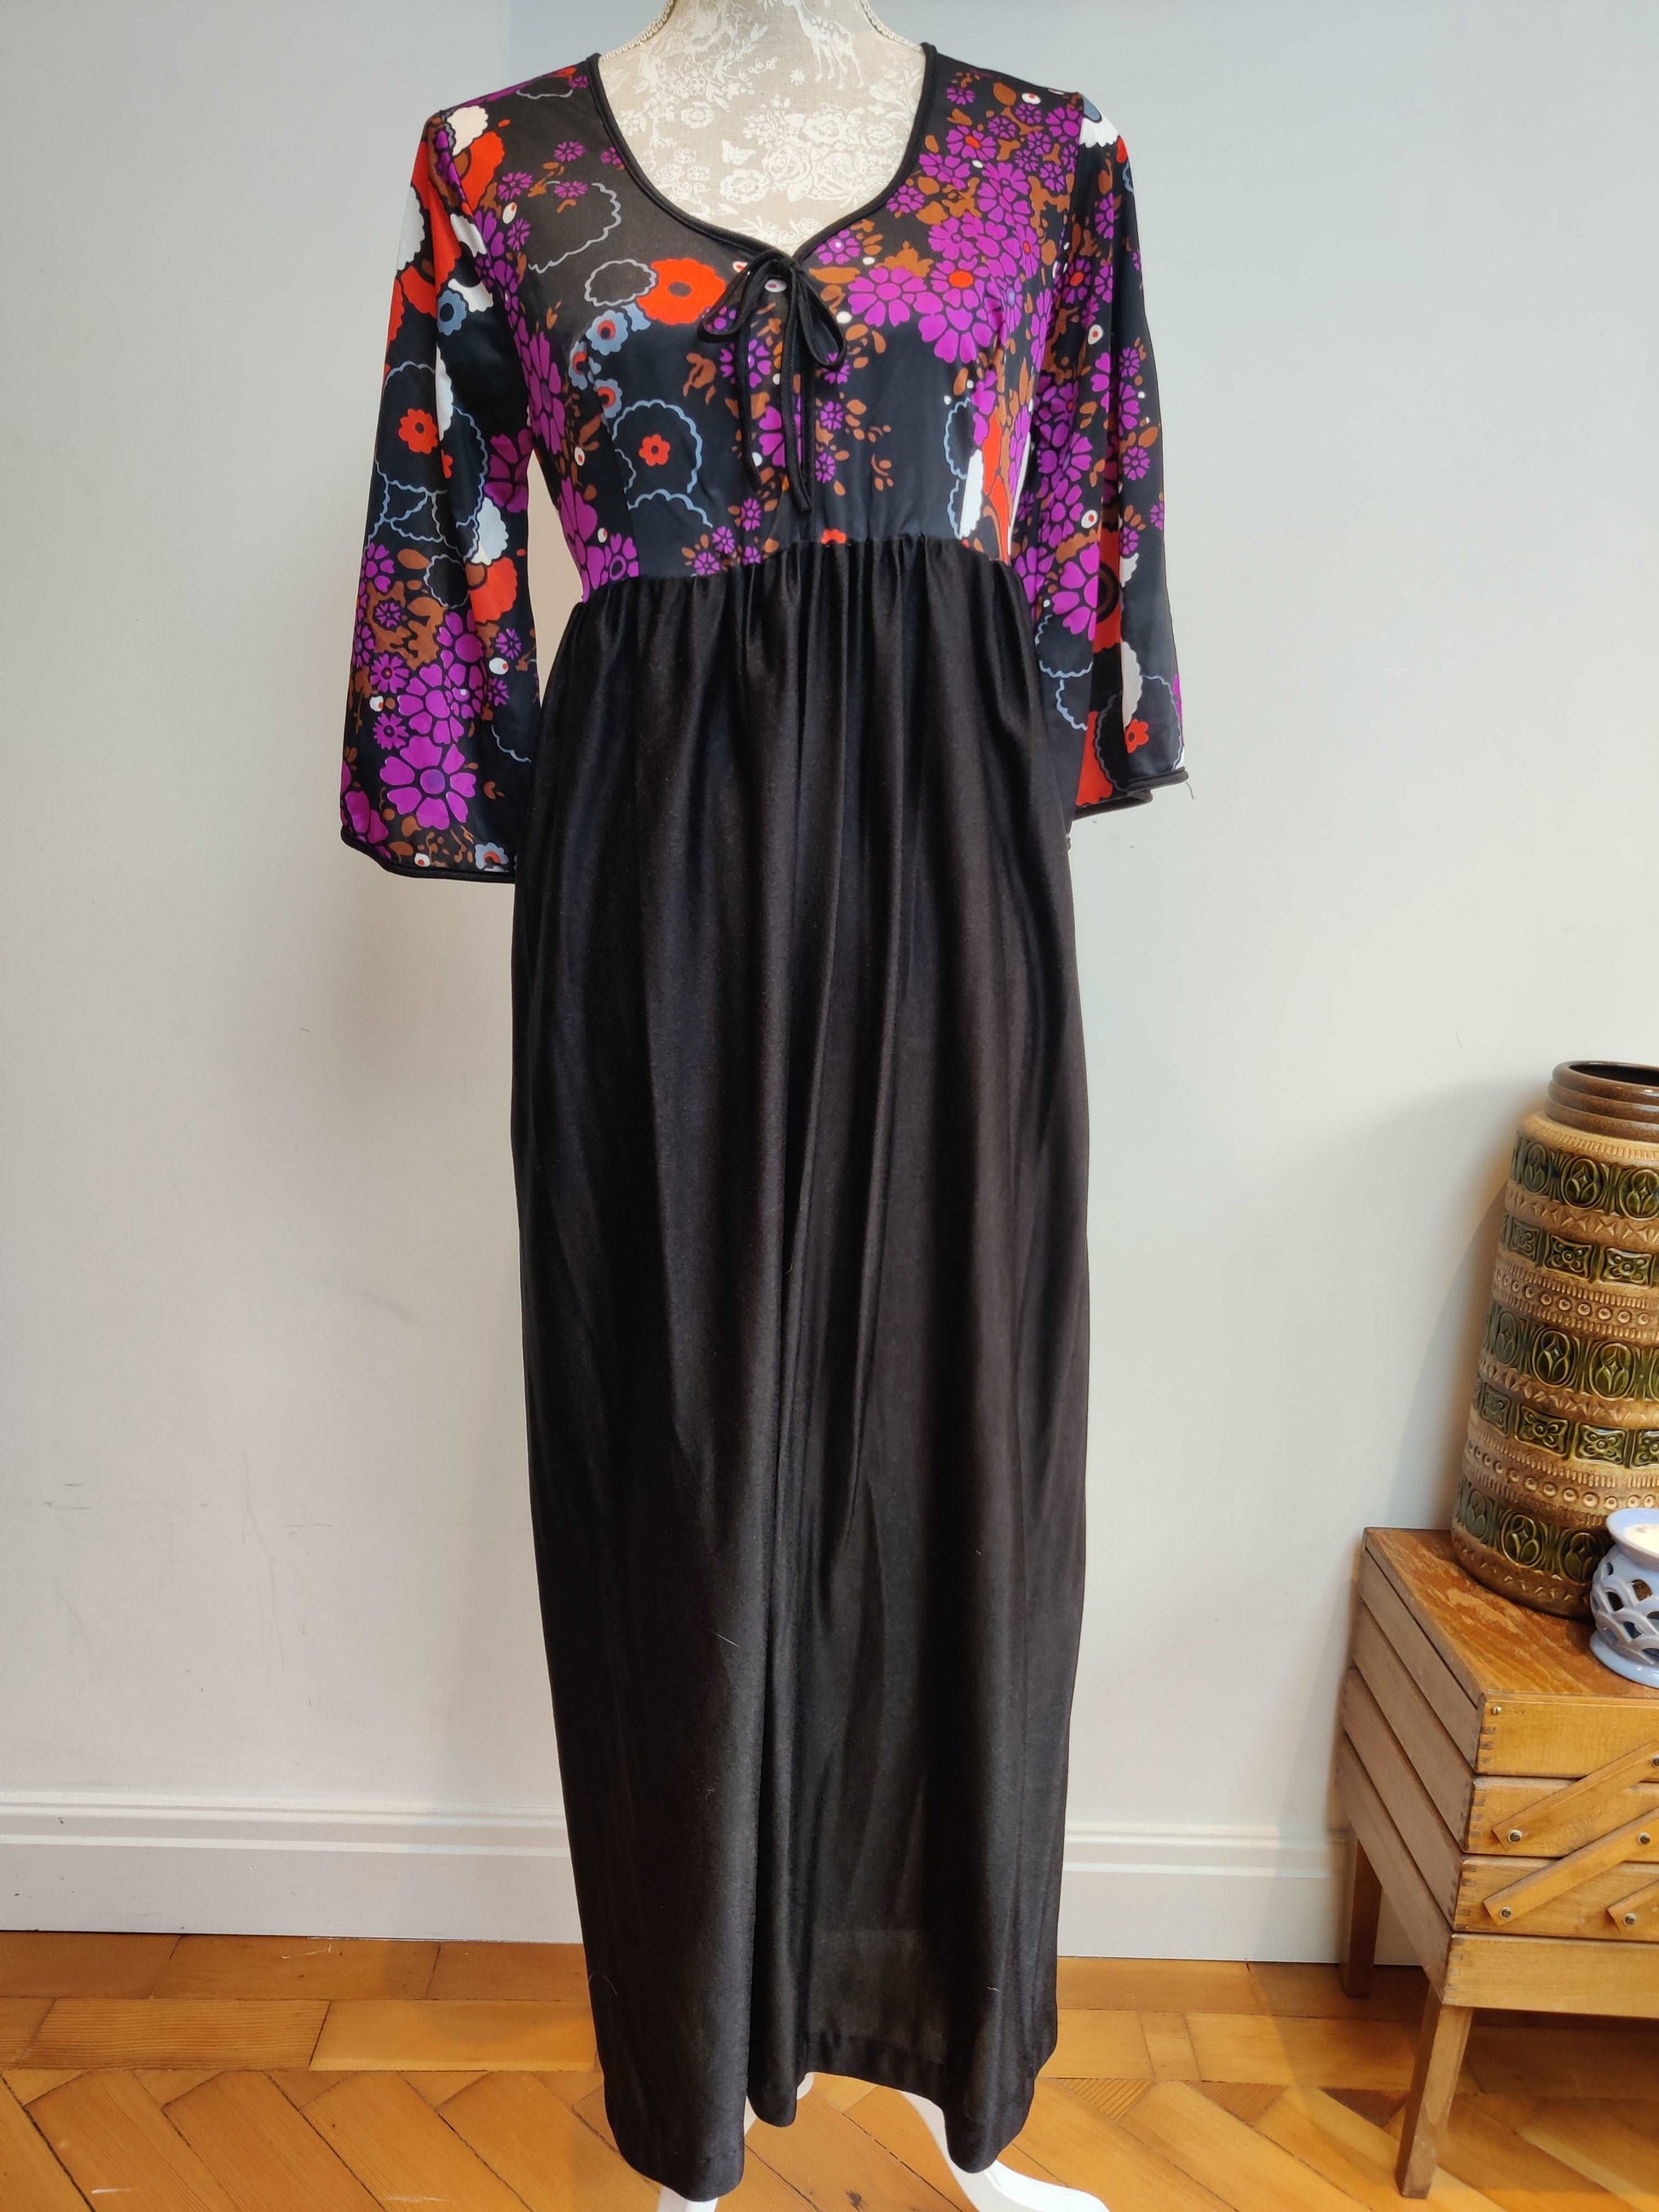 Stunning 70s maxi dress with black and pink floral design. Size 10.